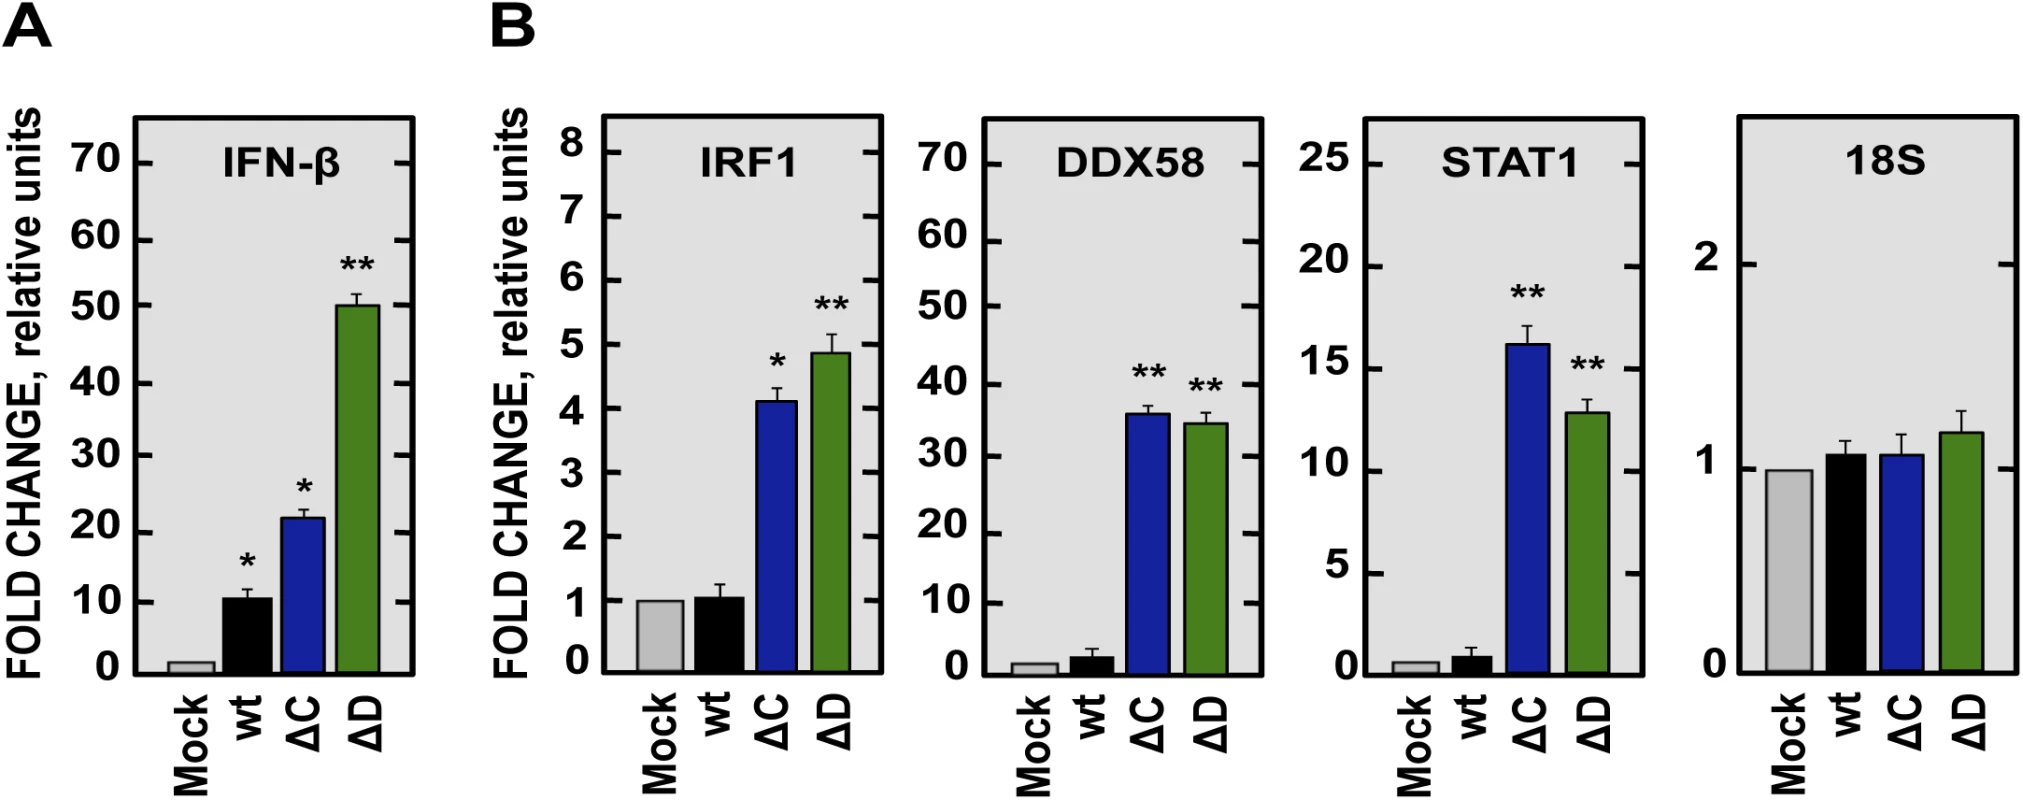 Expression of IFN-β and ISGs in SARS-CoV-nsp1* attenuated mutants infected cells.